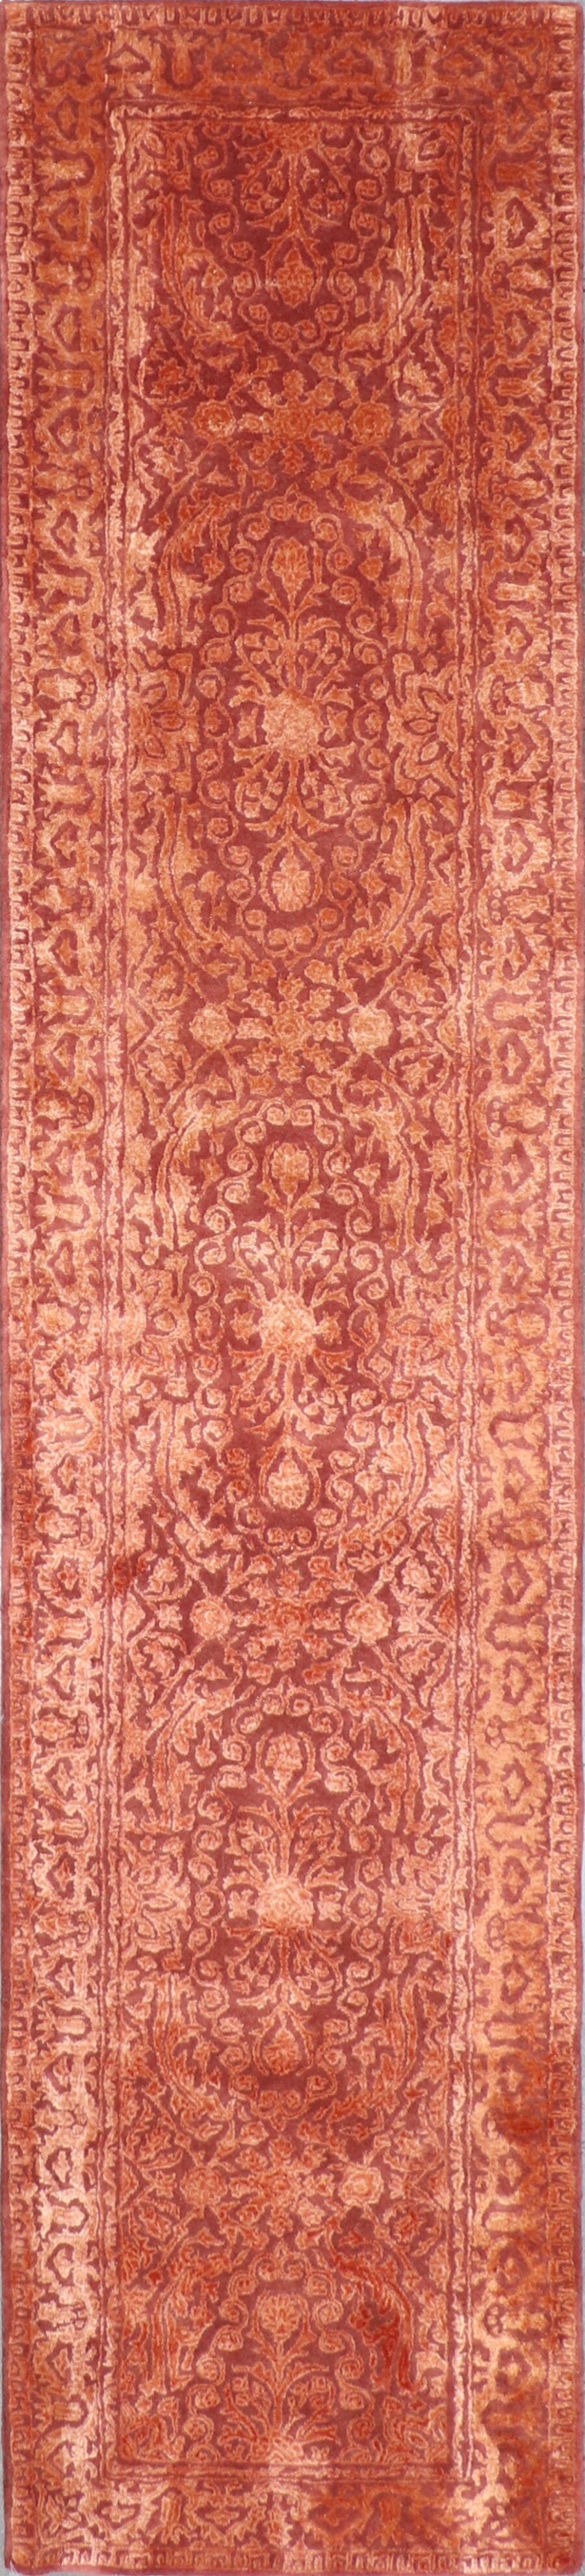 2'6"x11'8" Transitional Wool & Silk Hand-Tufted Rug - Direct Rug Import | Rugs in Chicago, Indiana,South Bend,Granger